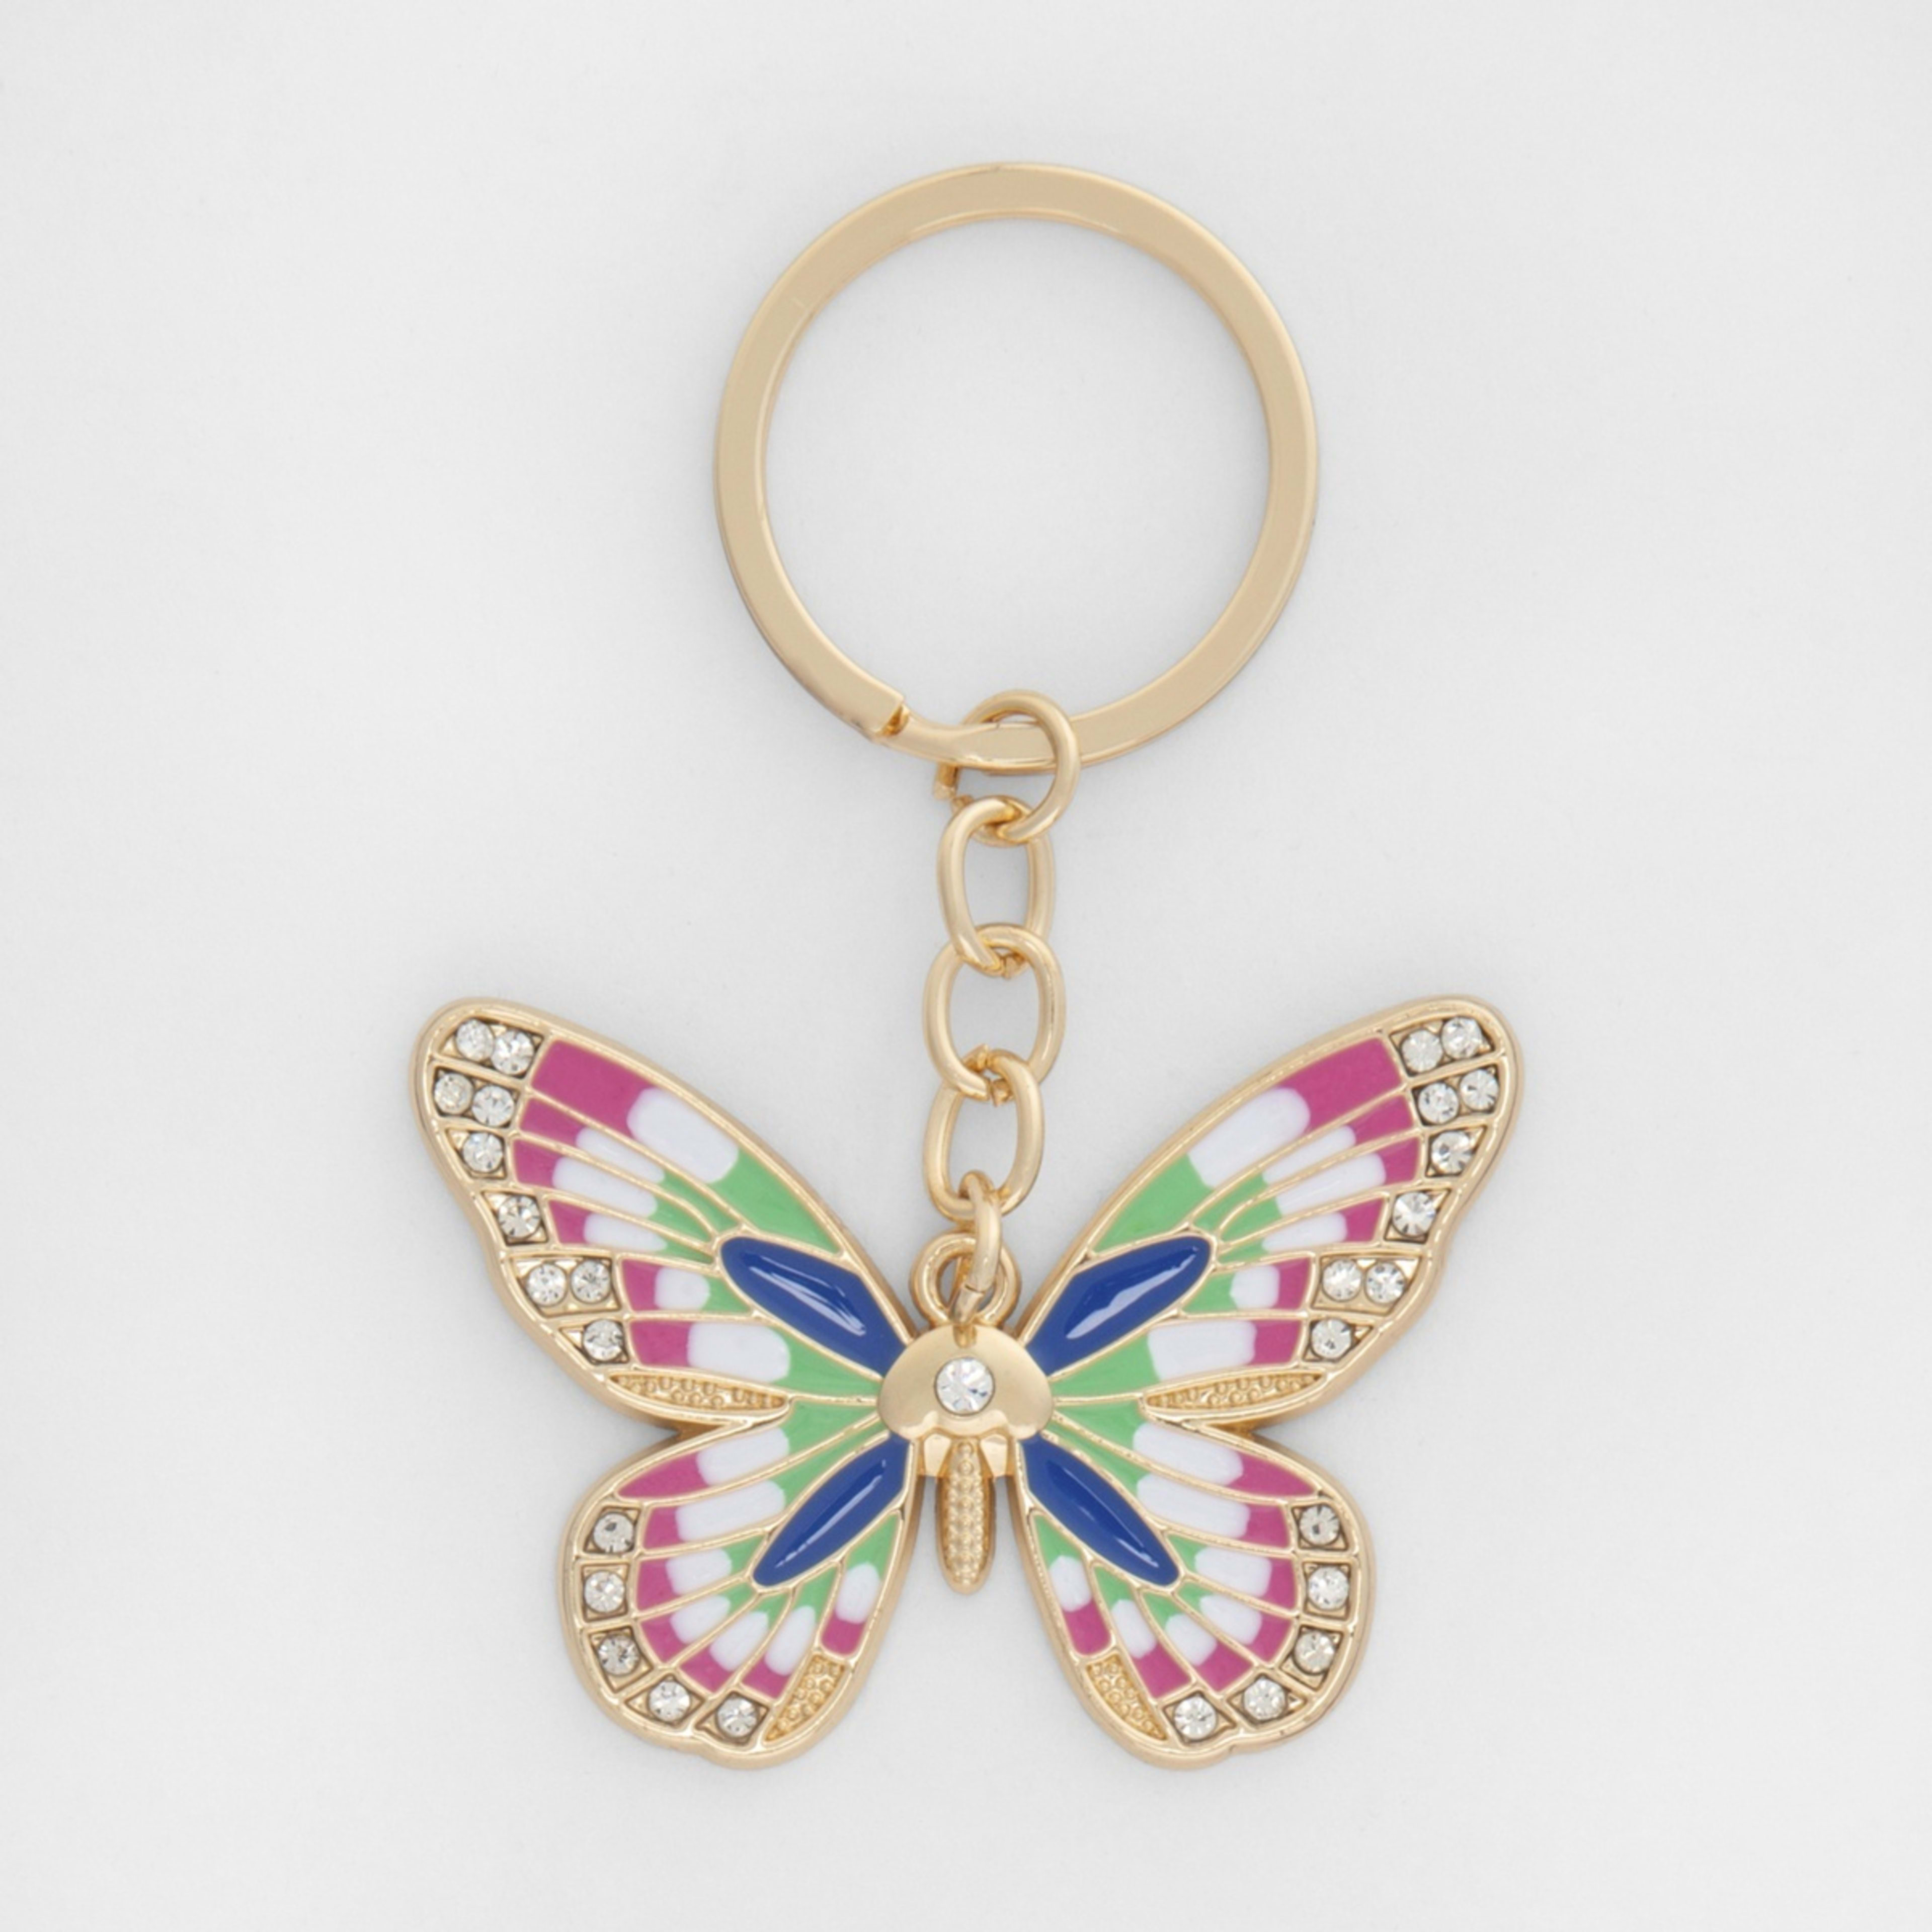 Butterfly Keyring - Pink, Blue and Gold Look - Kmart